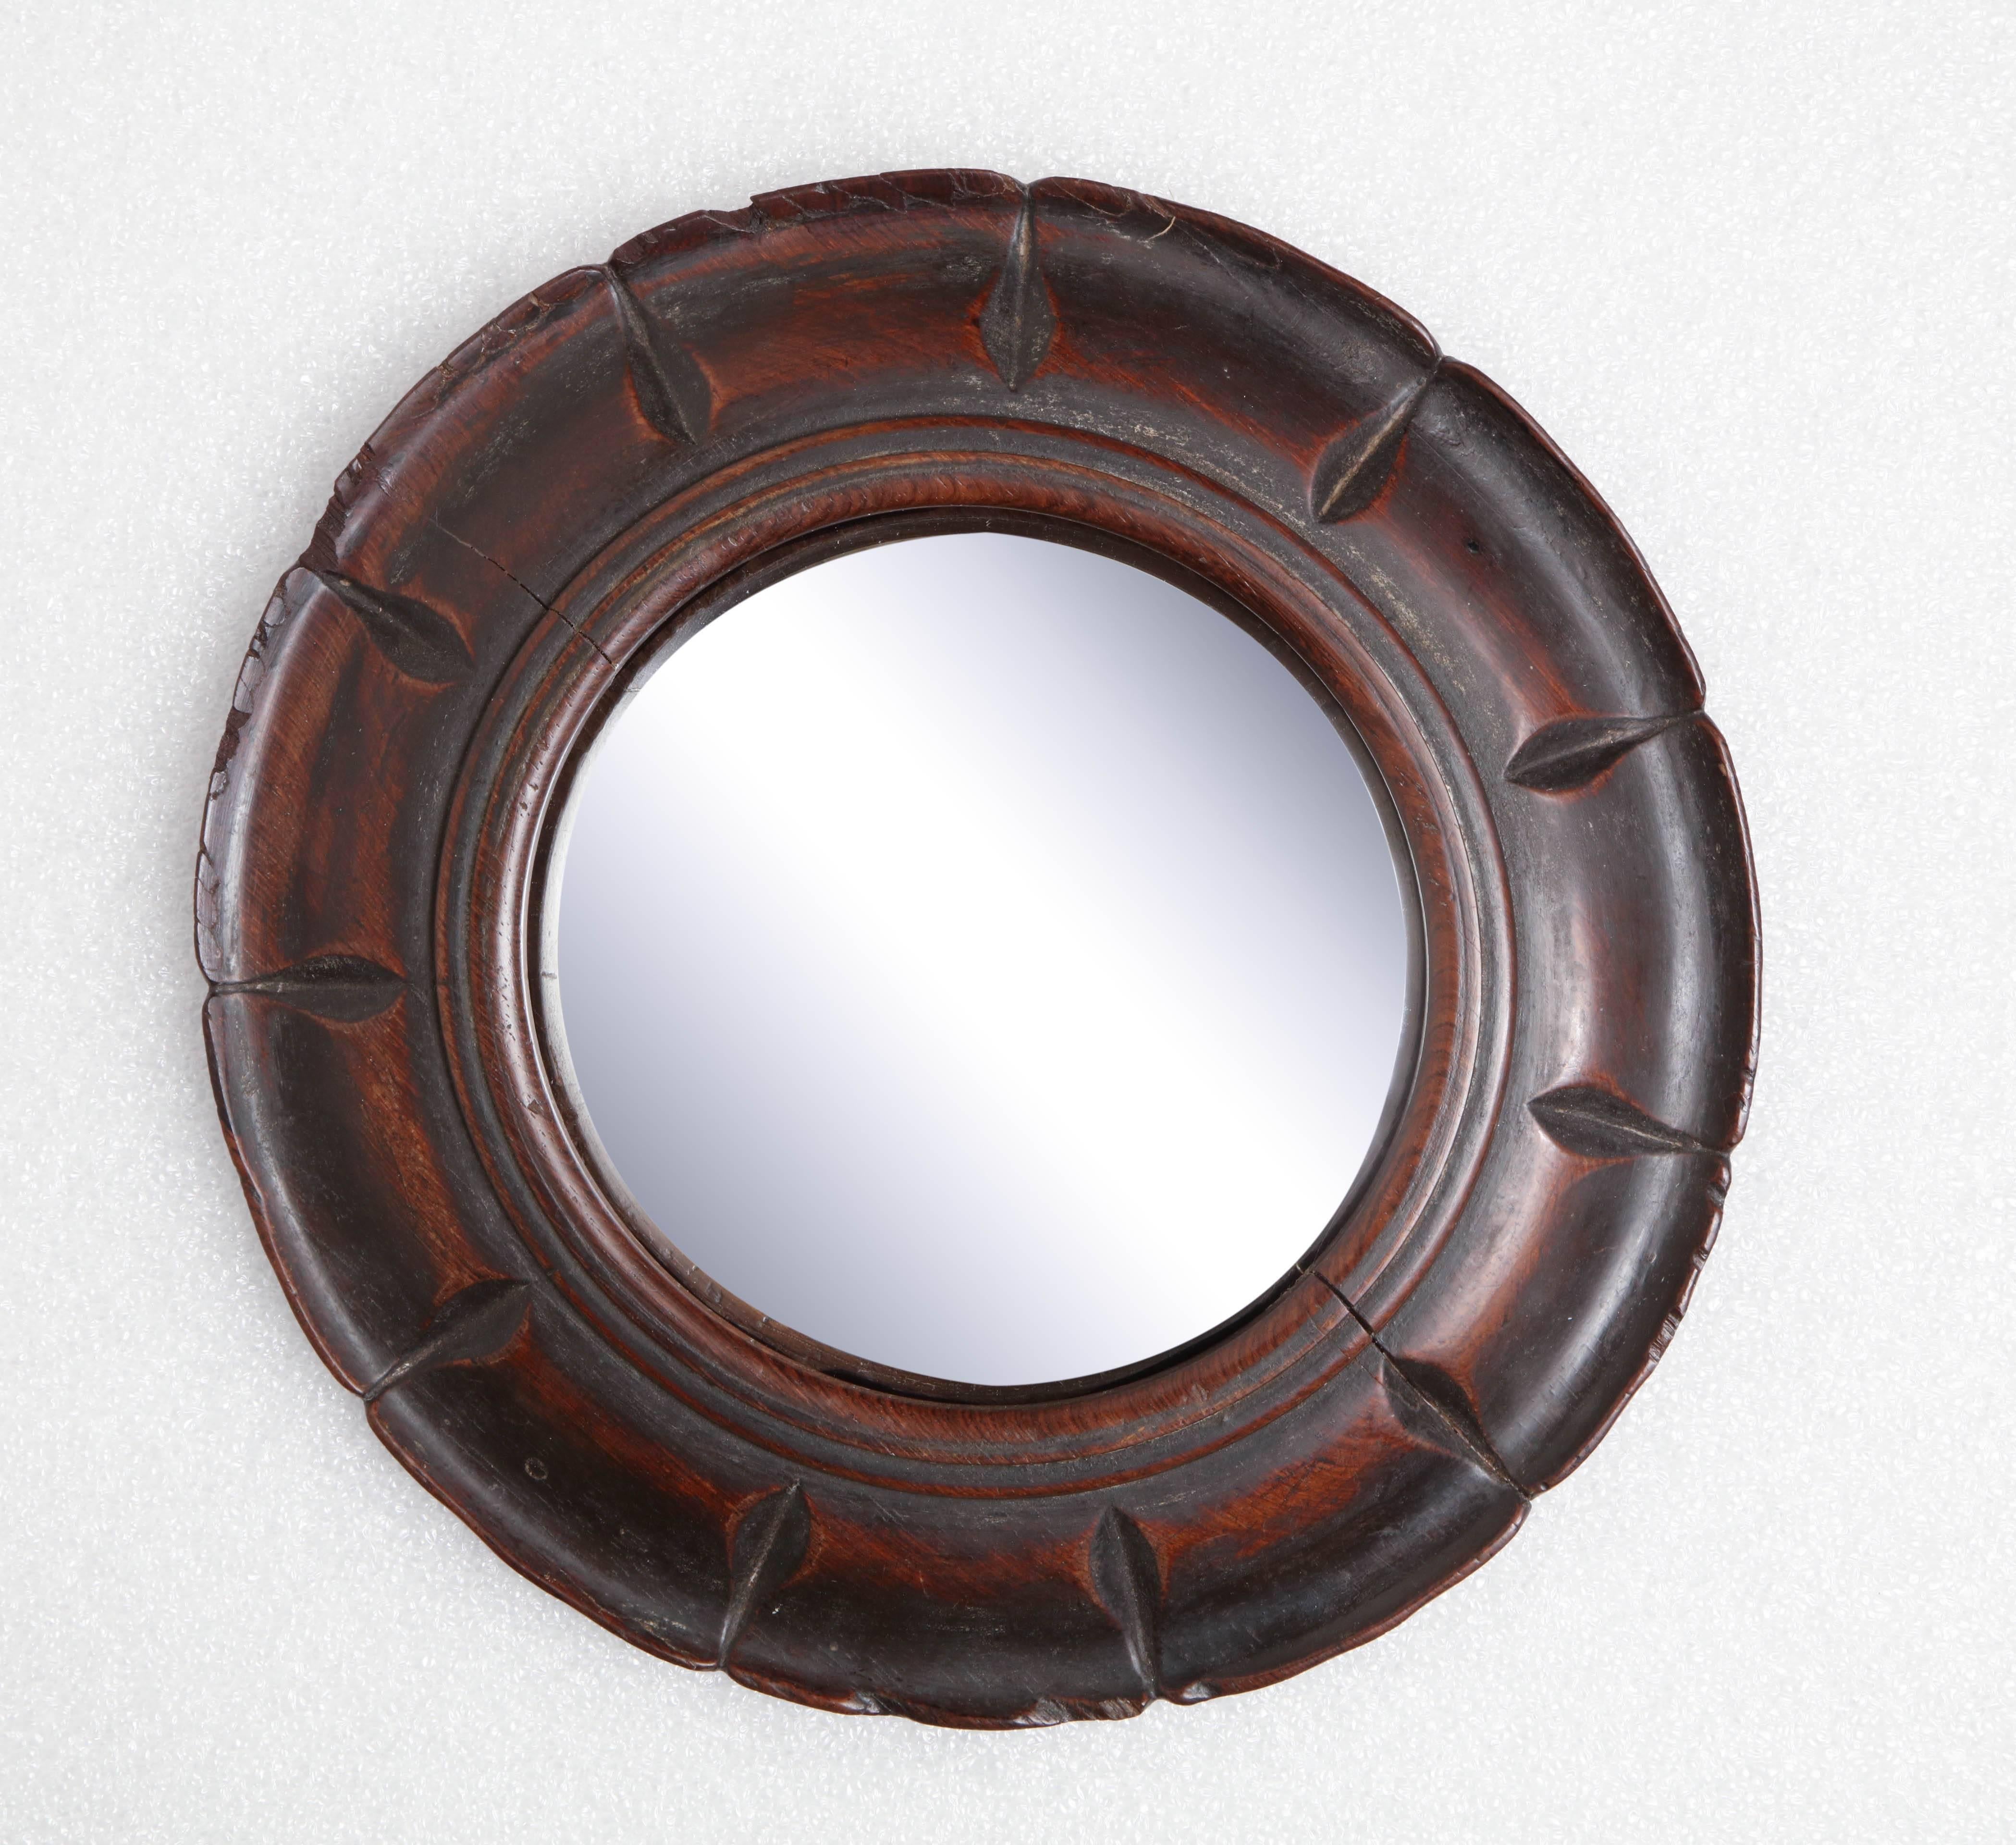 19th century English, convex mirror in a carved wooden frame.